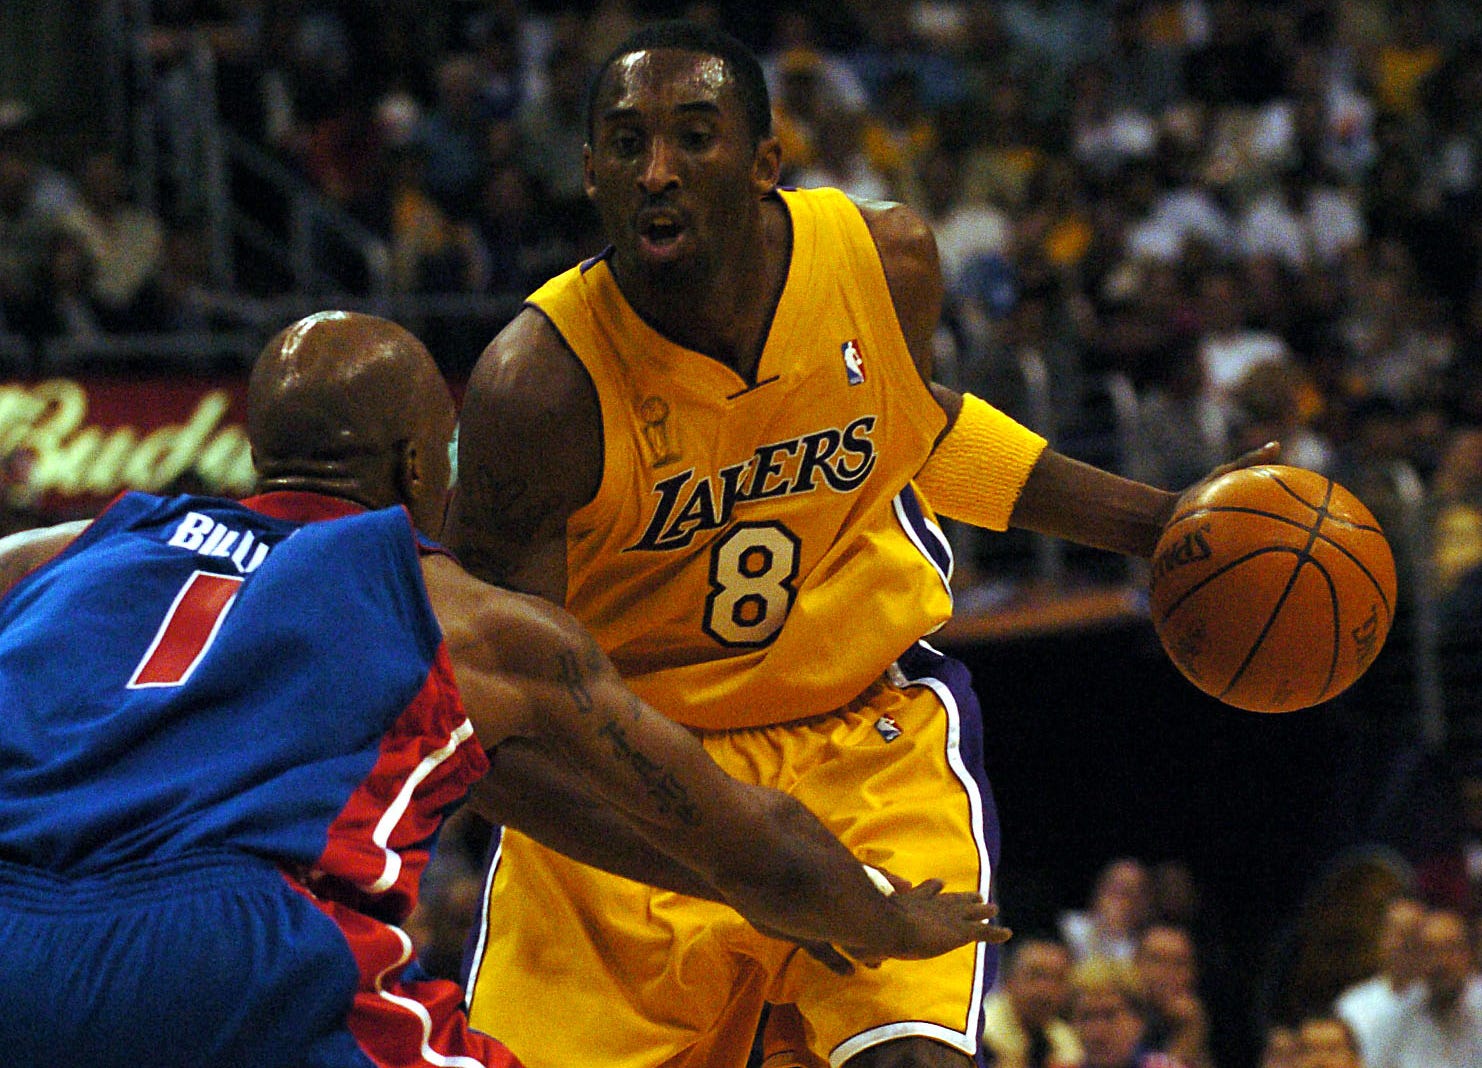 Chauncey Billups defends Kobe Bryant during Game 2 of the 2004 NBA FInals.